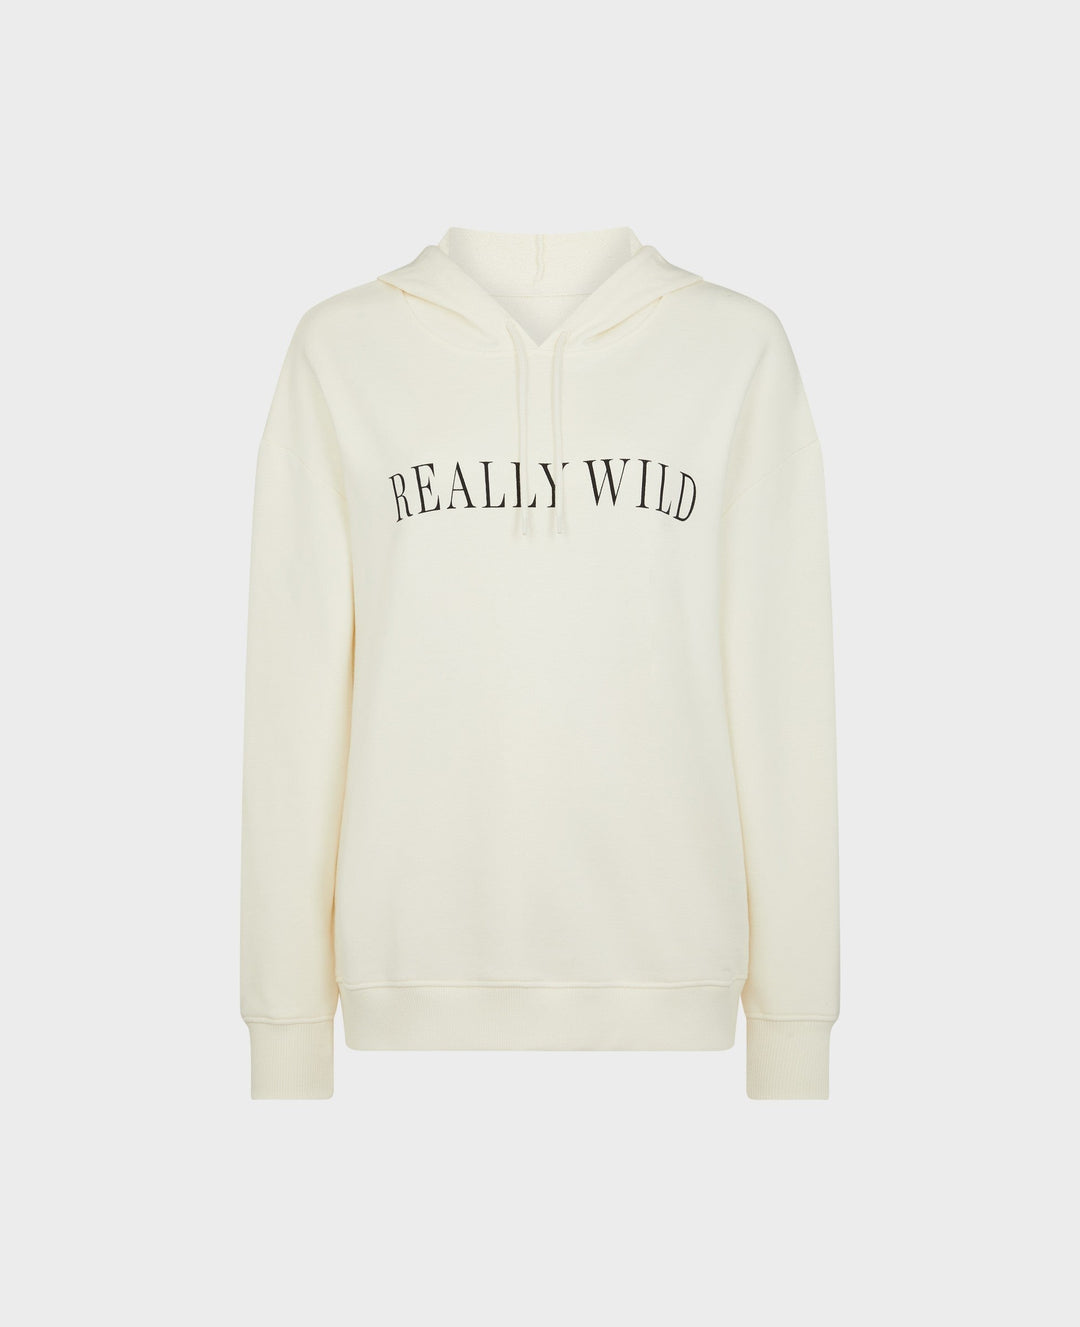 Snuggle up in our 100% organic cotton Really Wild logo print hoodie this season, in cool, neutral cream.